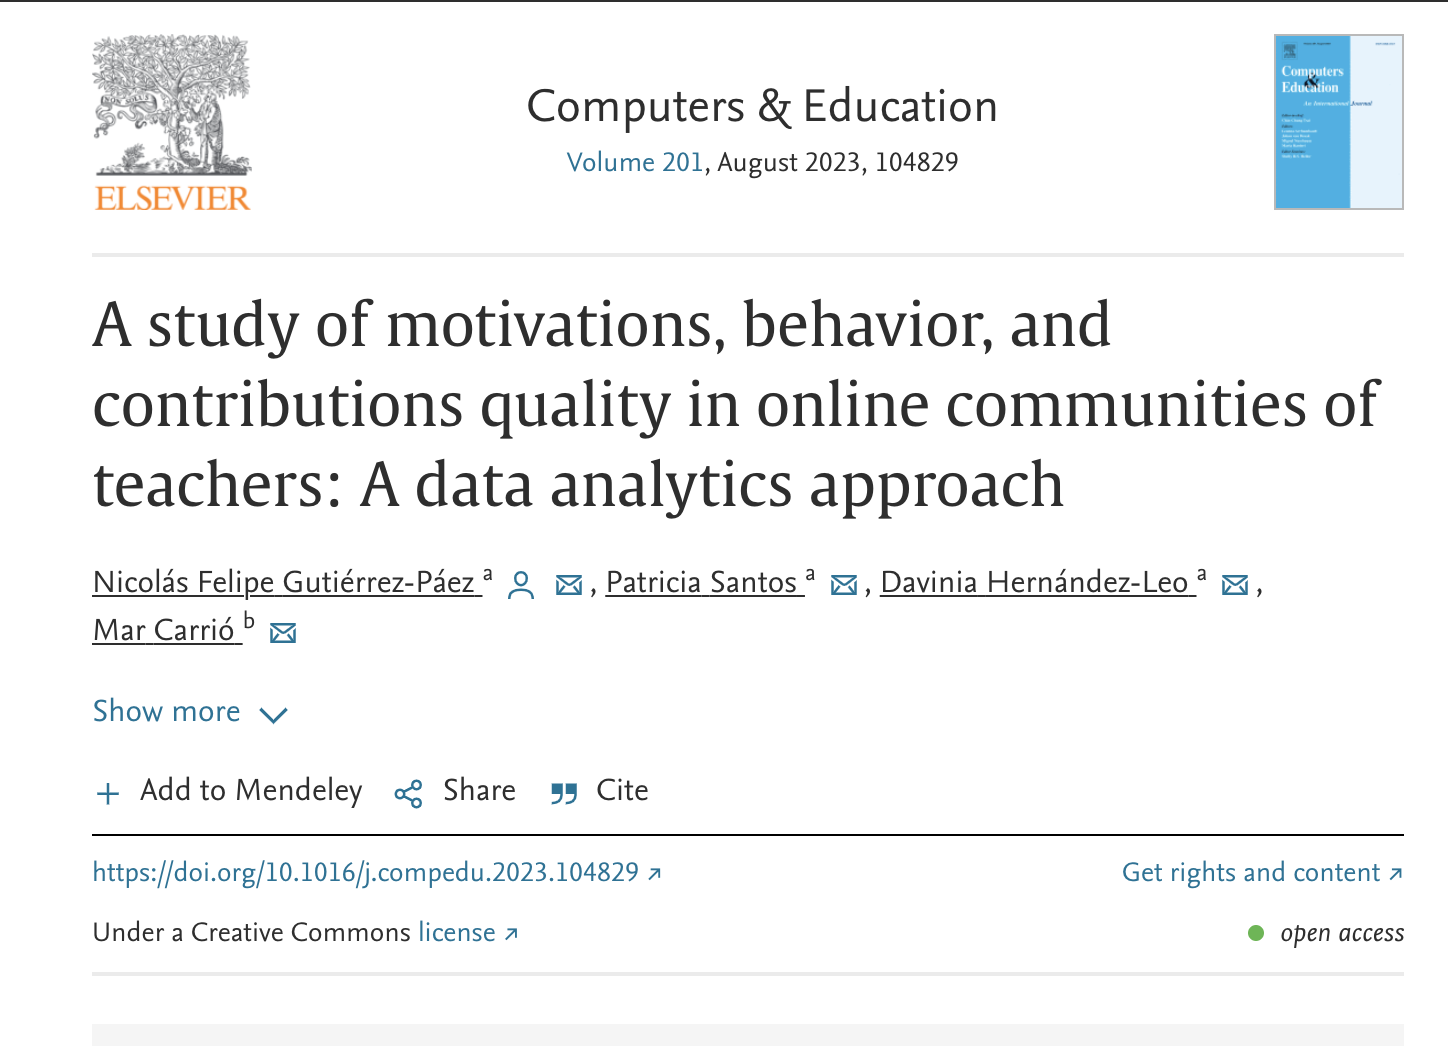 A study of motivations, behavior, and contributions quality in online communities of teachers